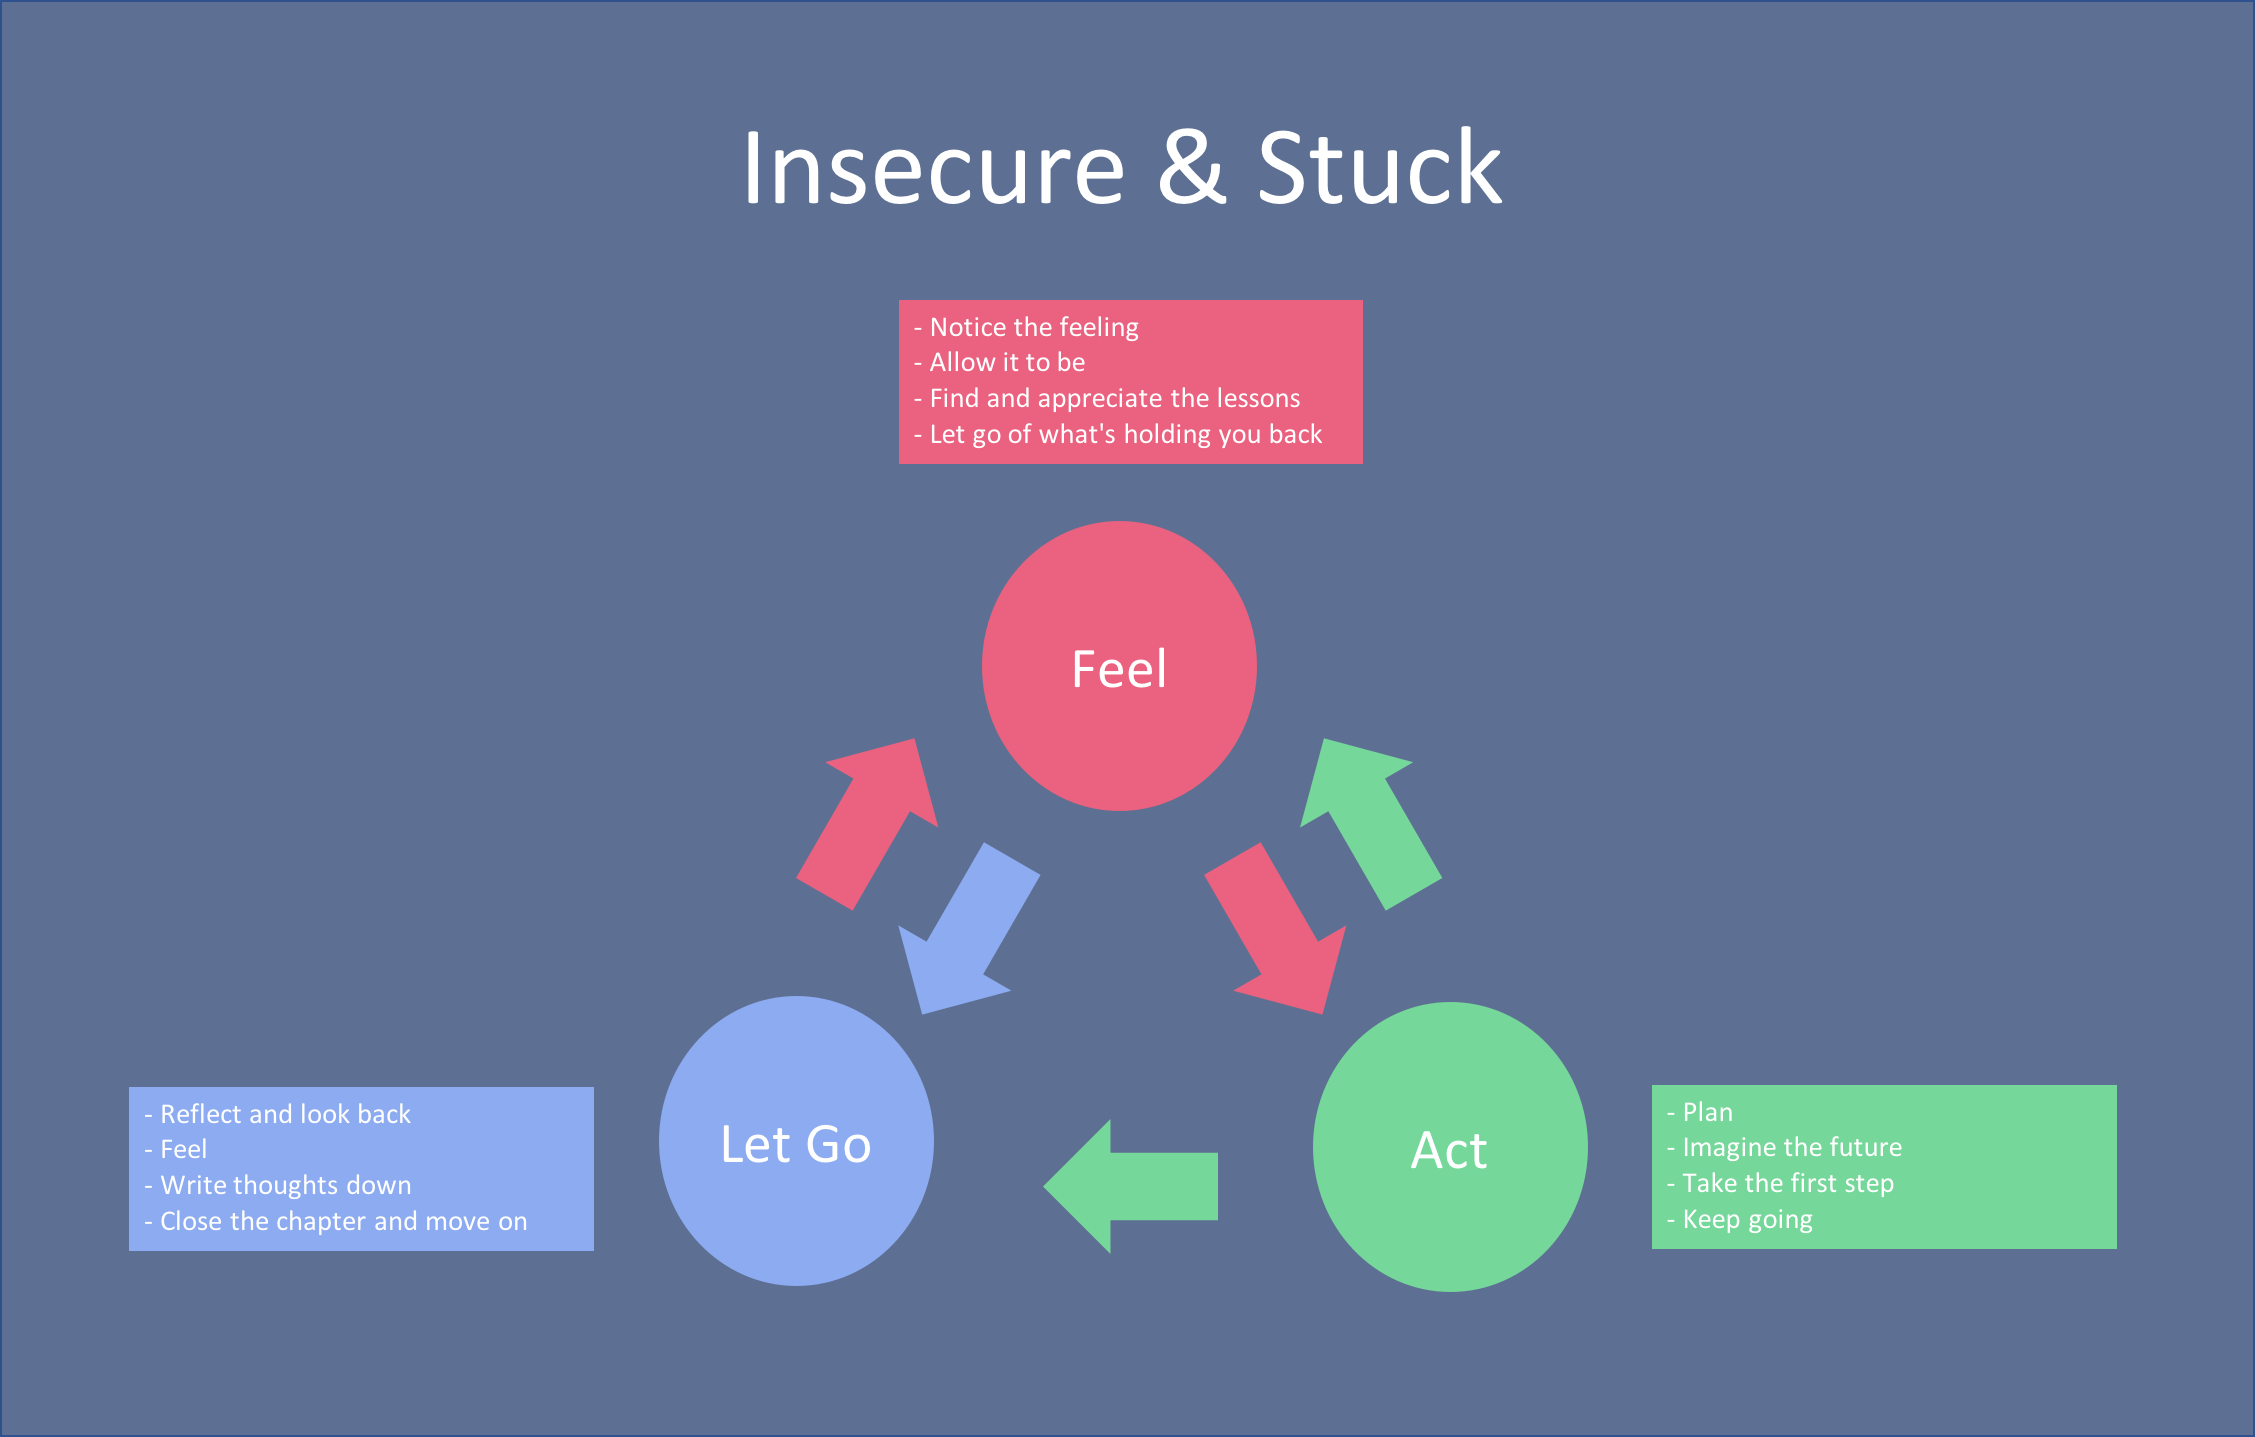 How to heal feeling insecure